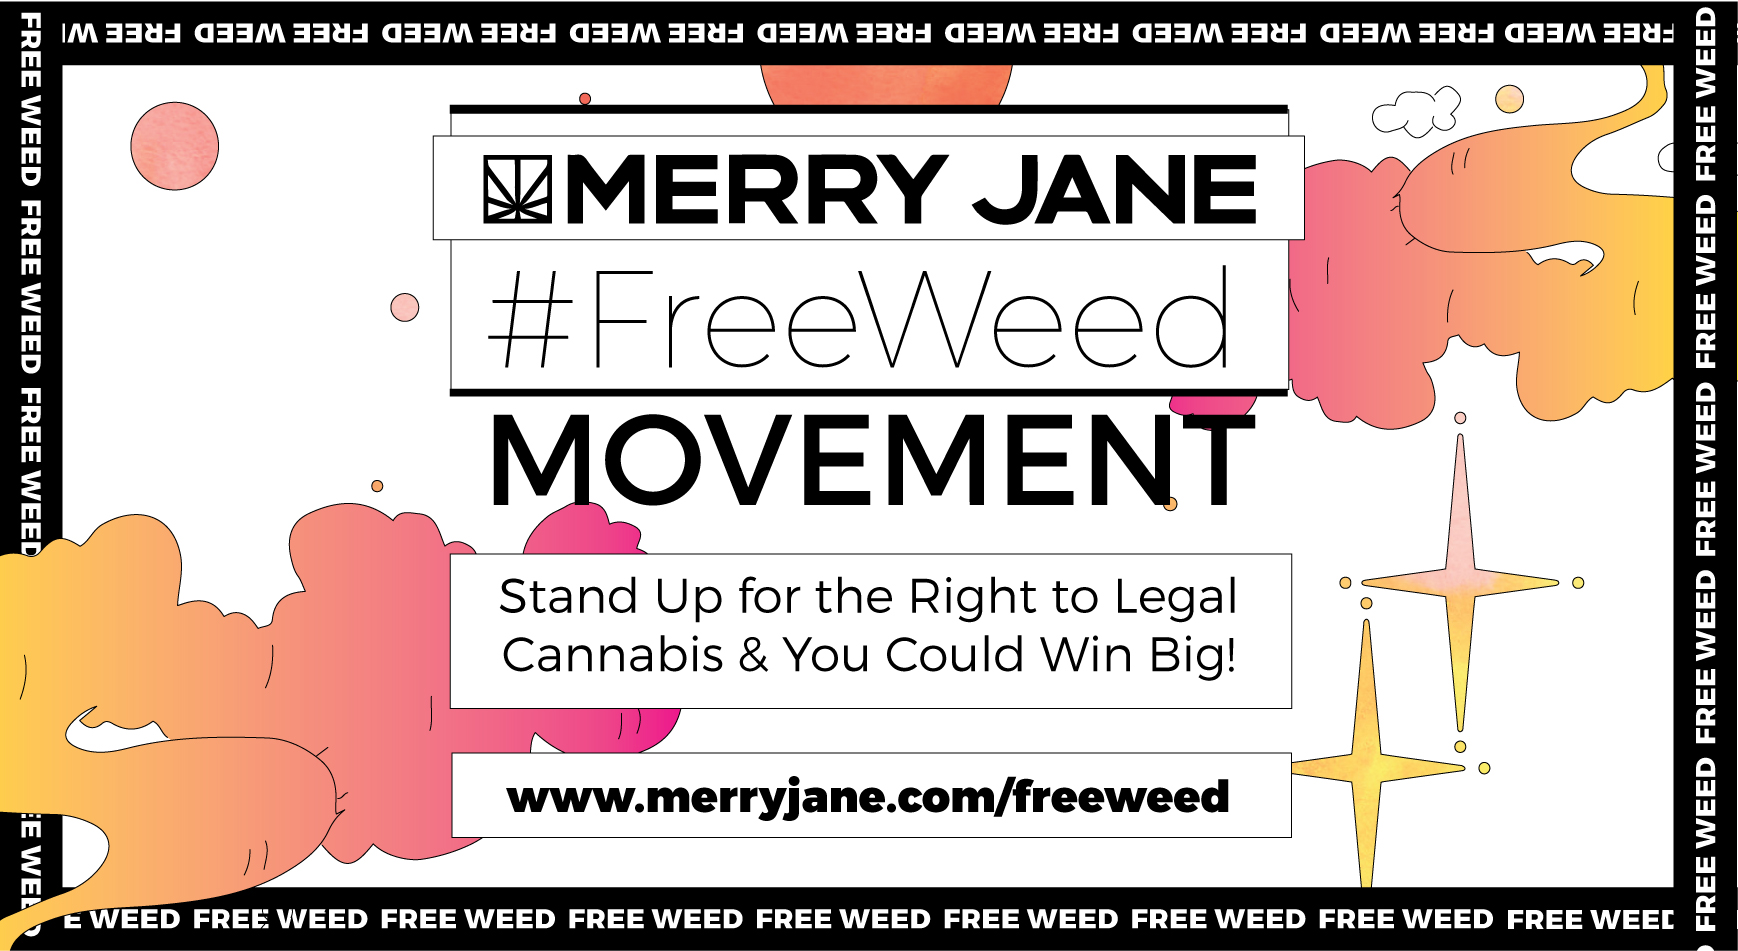 Join MERRY JANE’s #FreeWeed Movement: Stand Up for Legal Cannabis & Get Free Weed!